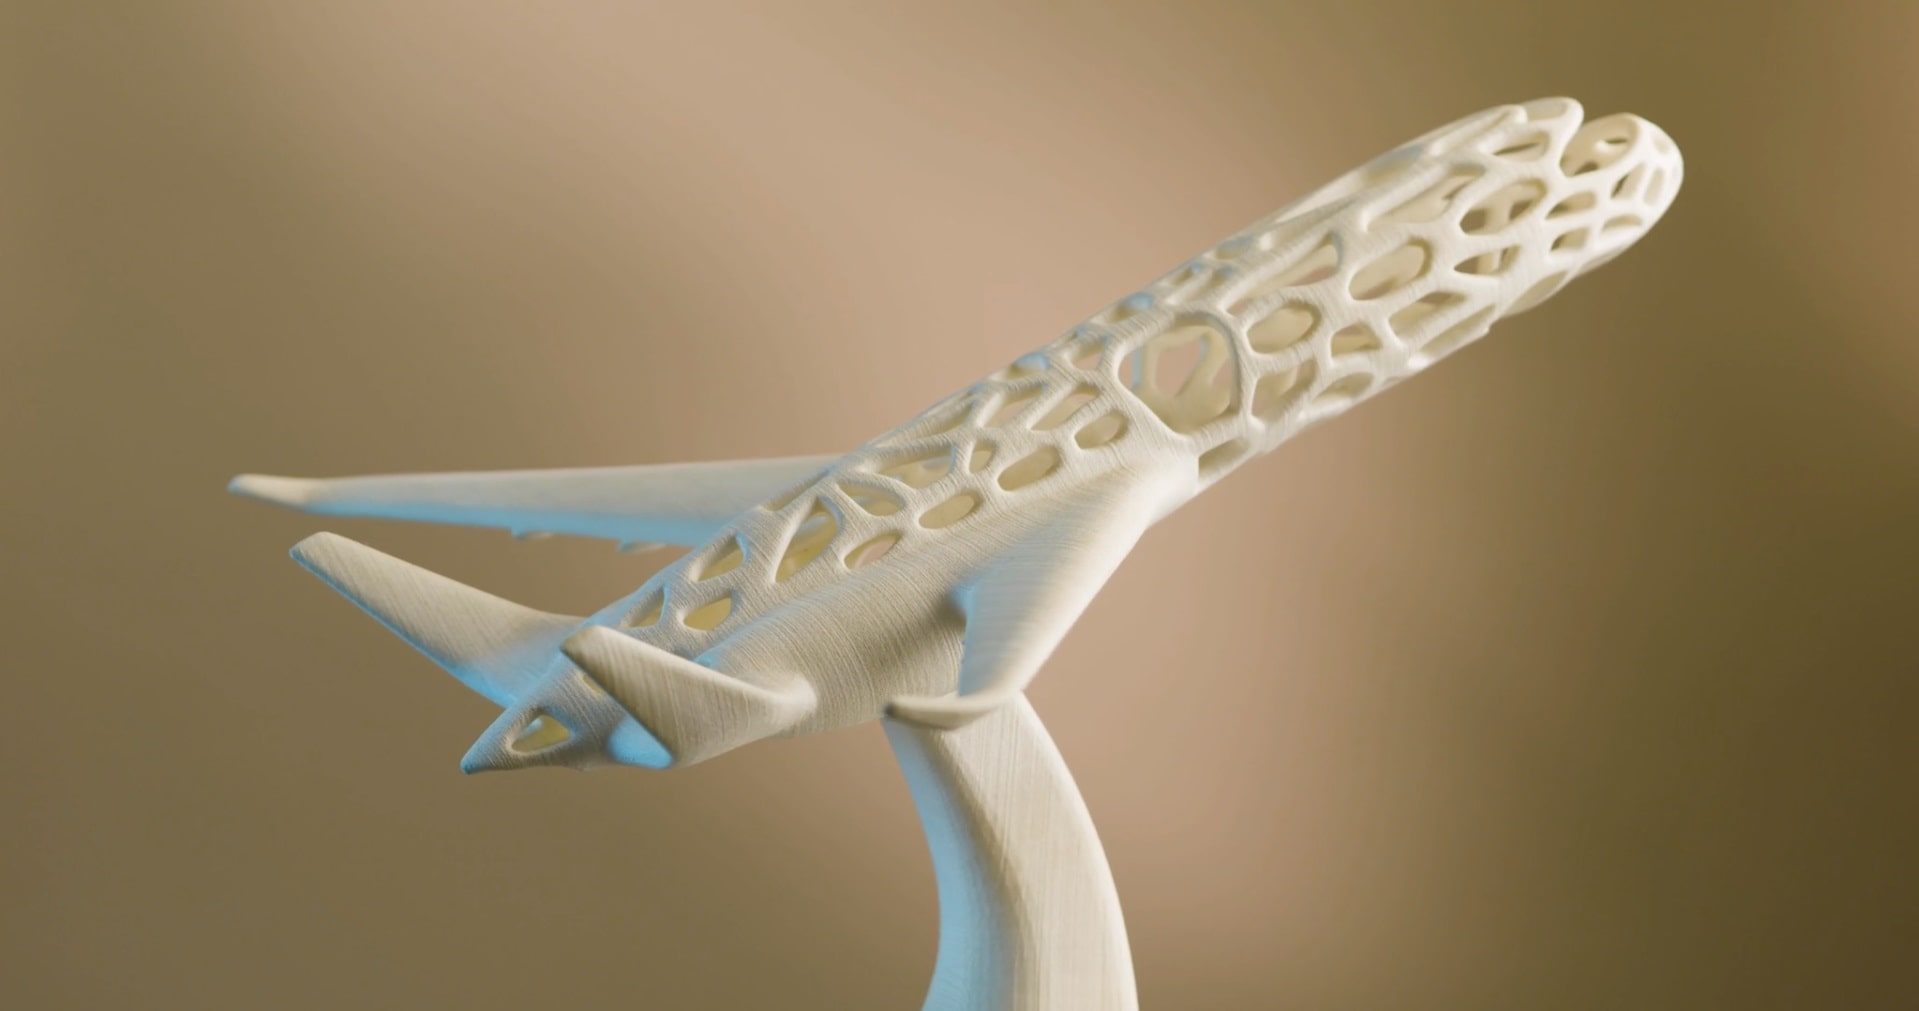 This image shows a 3D printed model of a bionic aircraft 